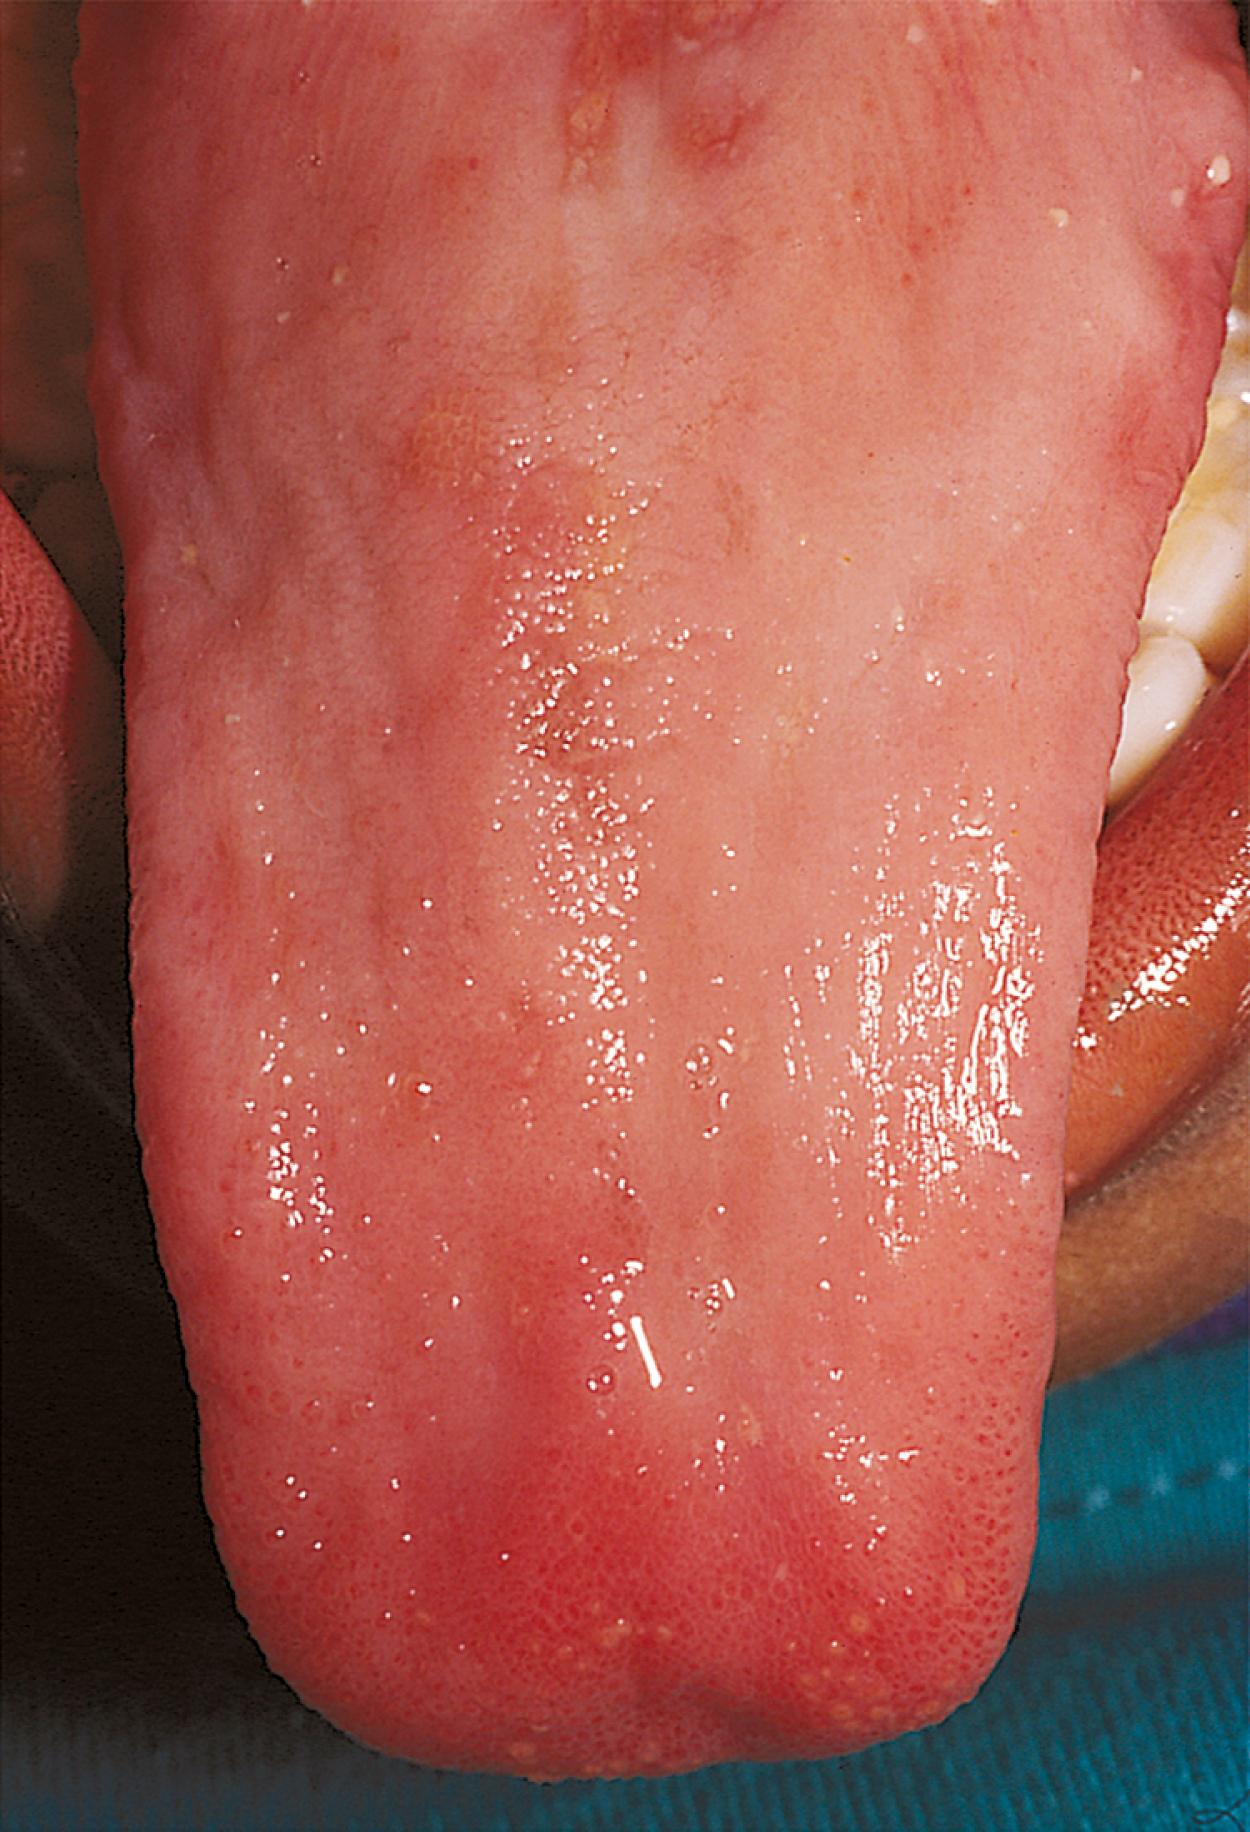 Fig. 12.9, A smooth, beefy red tongue may be observed in the physical examination of a patient with vitamin B 12 deficiency. This patient depended on total parenteral nutrition for several years without vitamin B 12 supplementation.